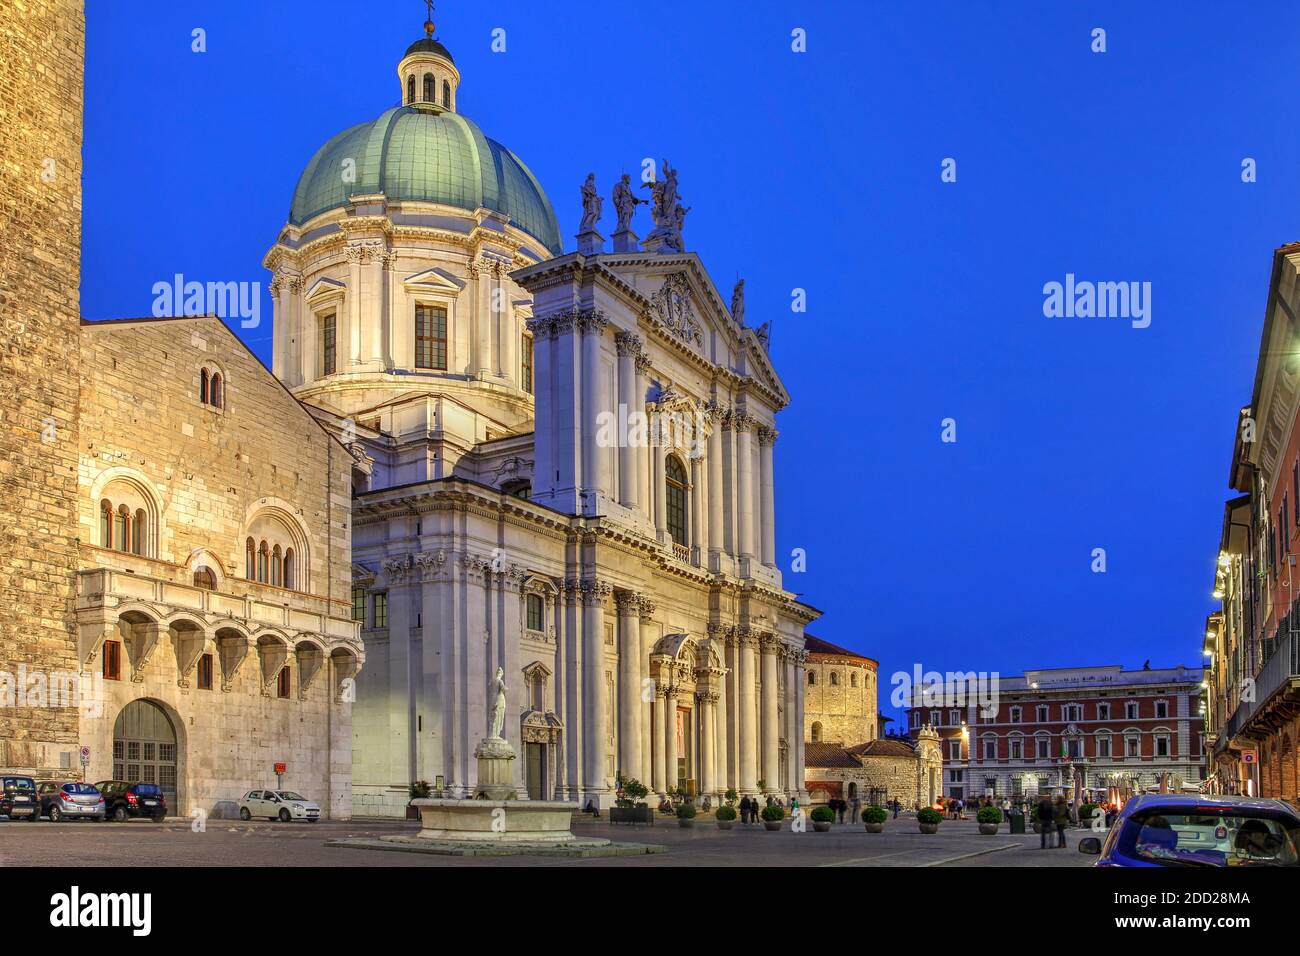 Night scene in Piazza Paolo VI, featuring The Broletto Palace (Townhall), Duomo Nuovo (New Cathedral) and Duomo Vecchio (Old Cathedral or La Rotonda) Stock Photo